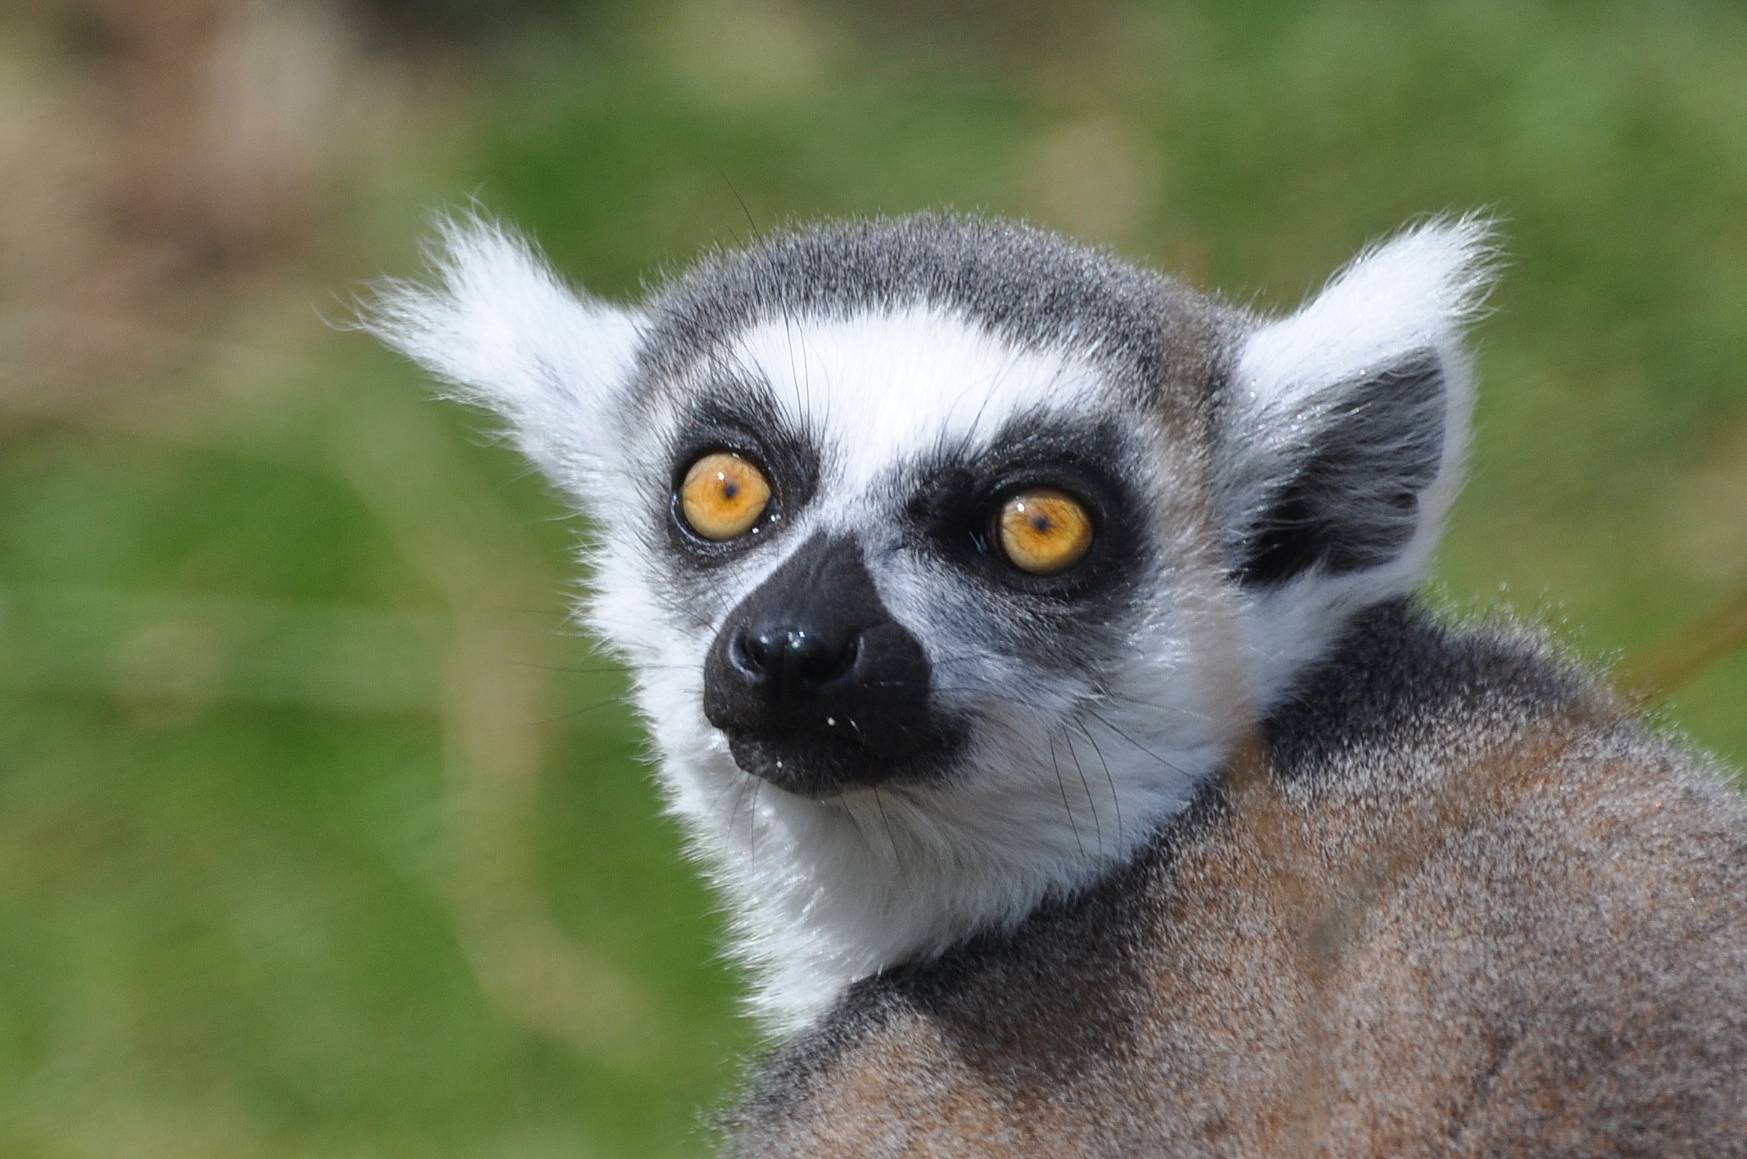 Meeting with the Ring Tailed Lemurs